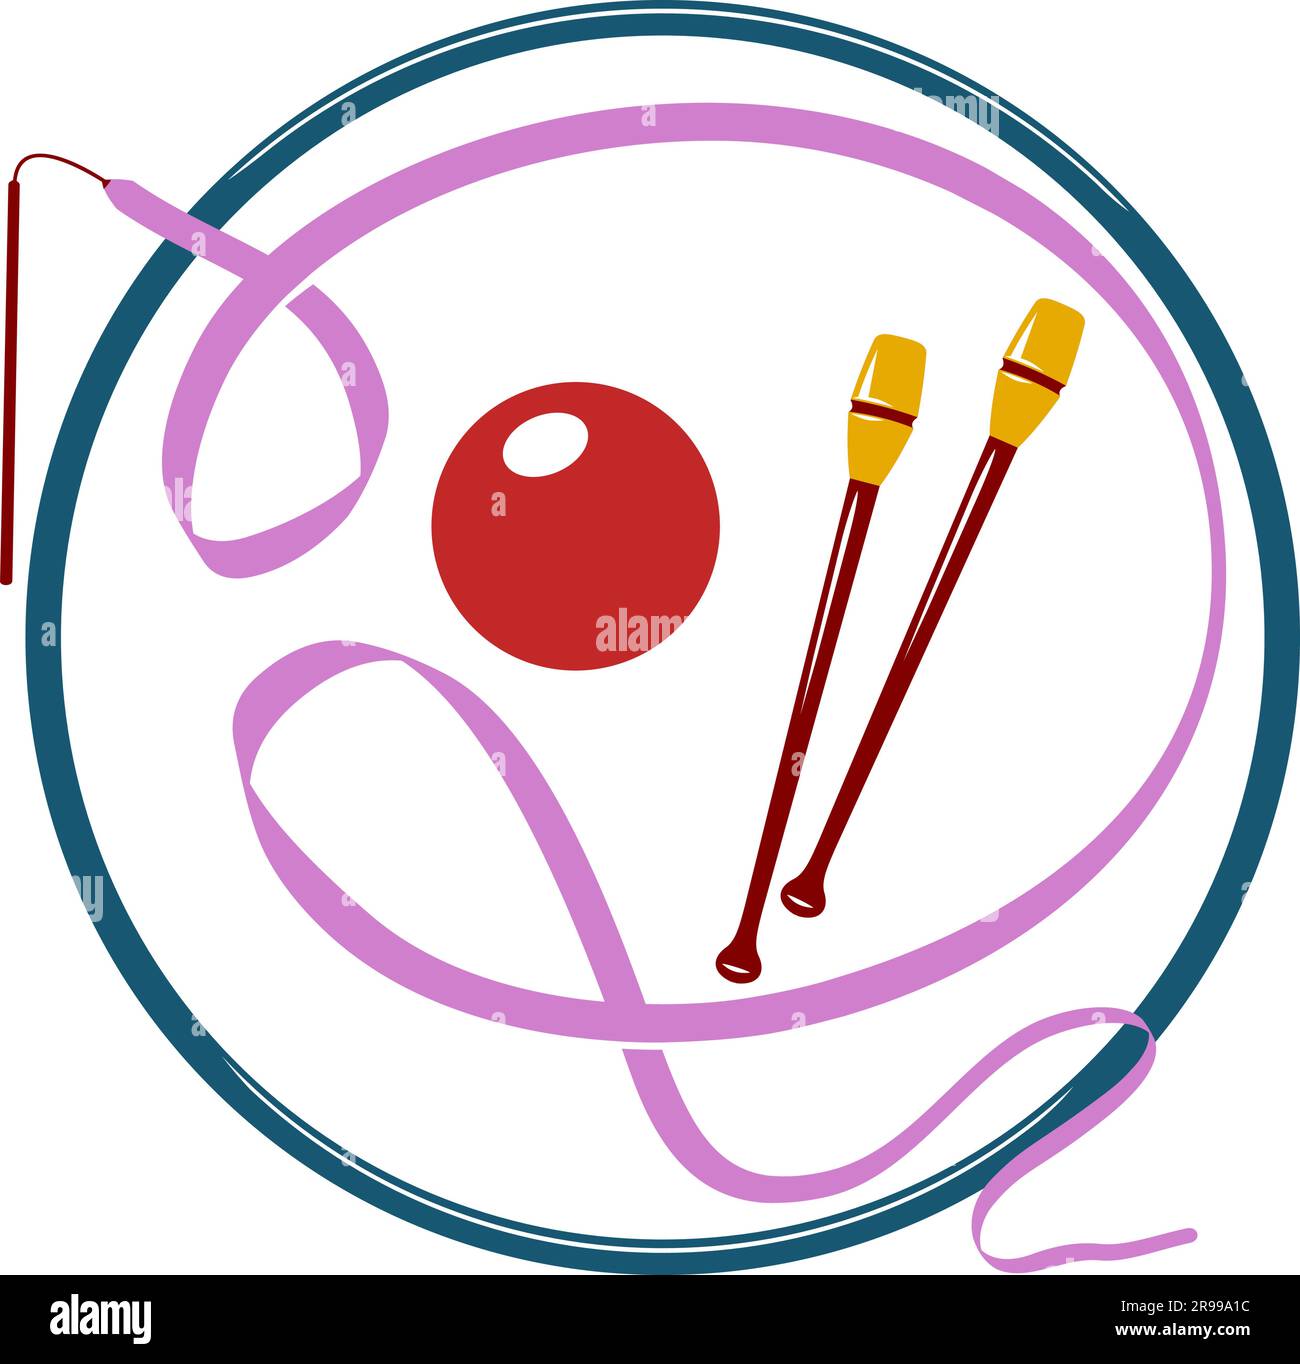 Set of Equipment for Rhythmic Gymnastics. All objects are separate. Stock Vector